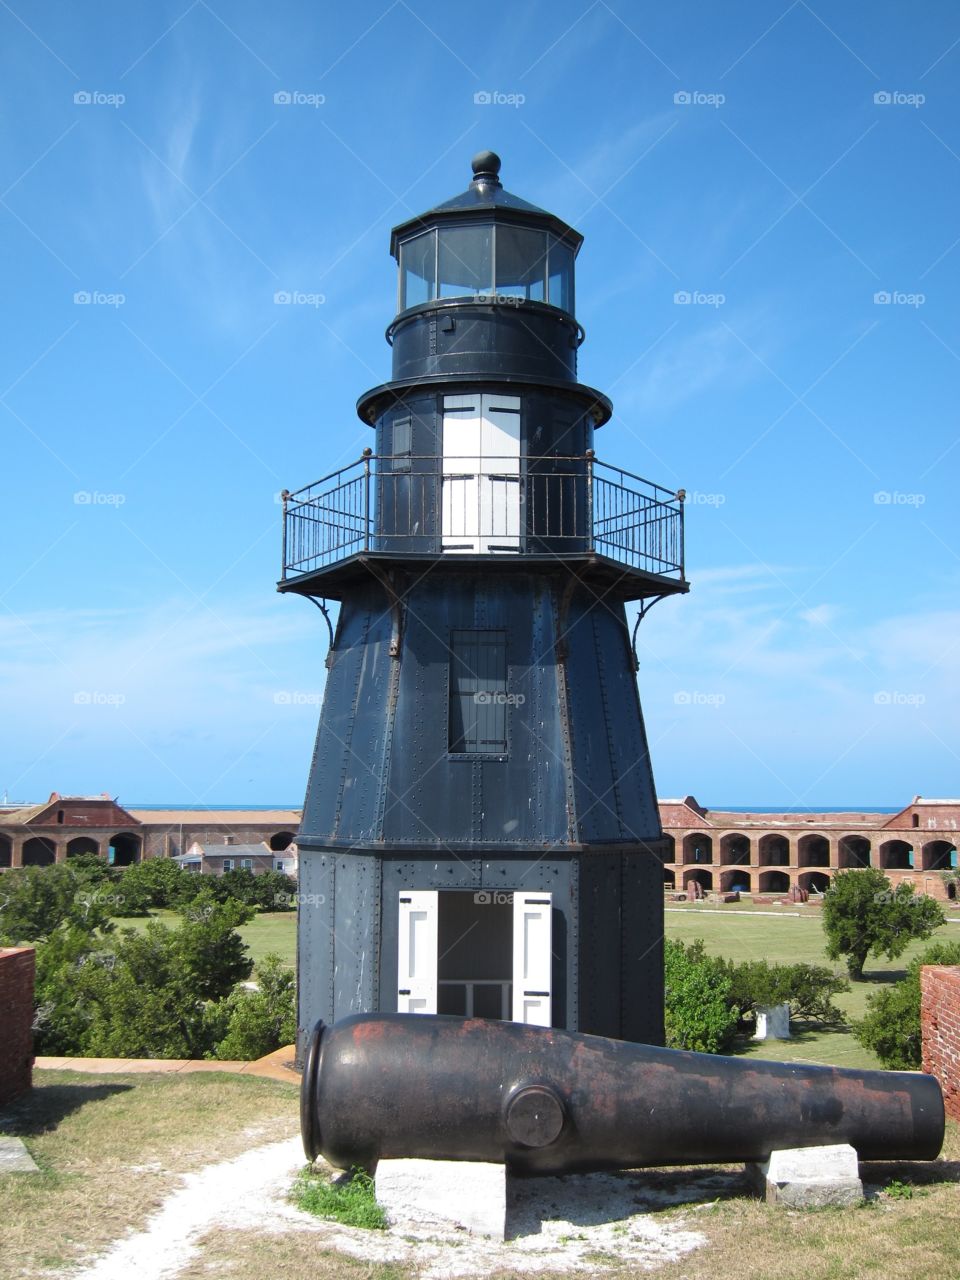 Last light house in the world. The lighthouse at fort Jefferson
Wish I could spend more time at this island 